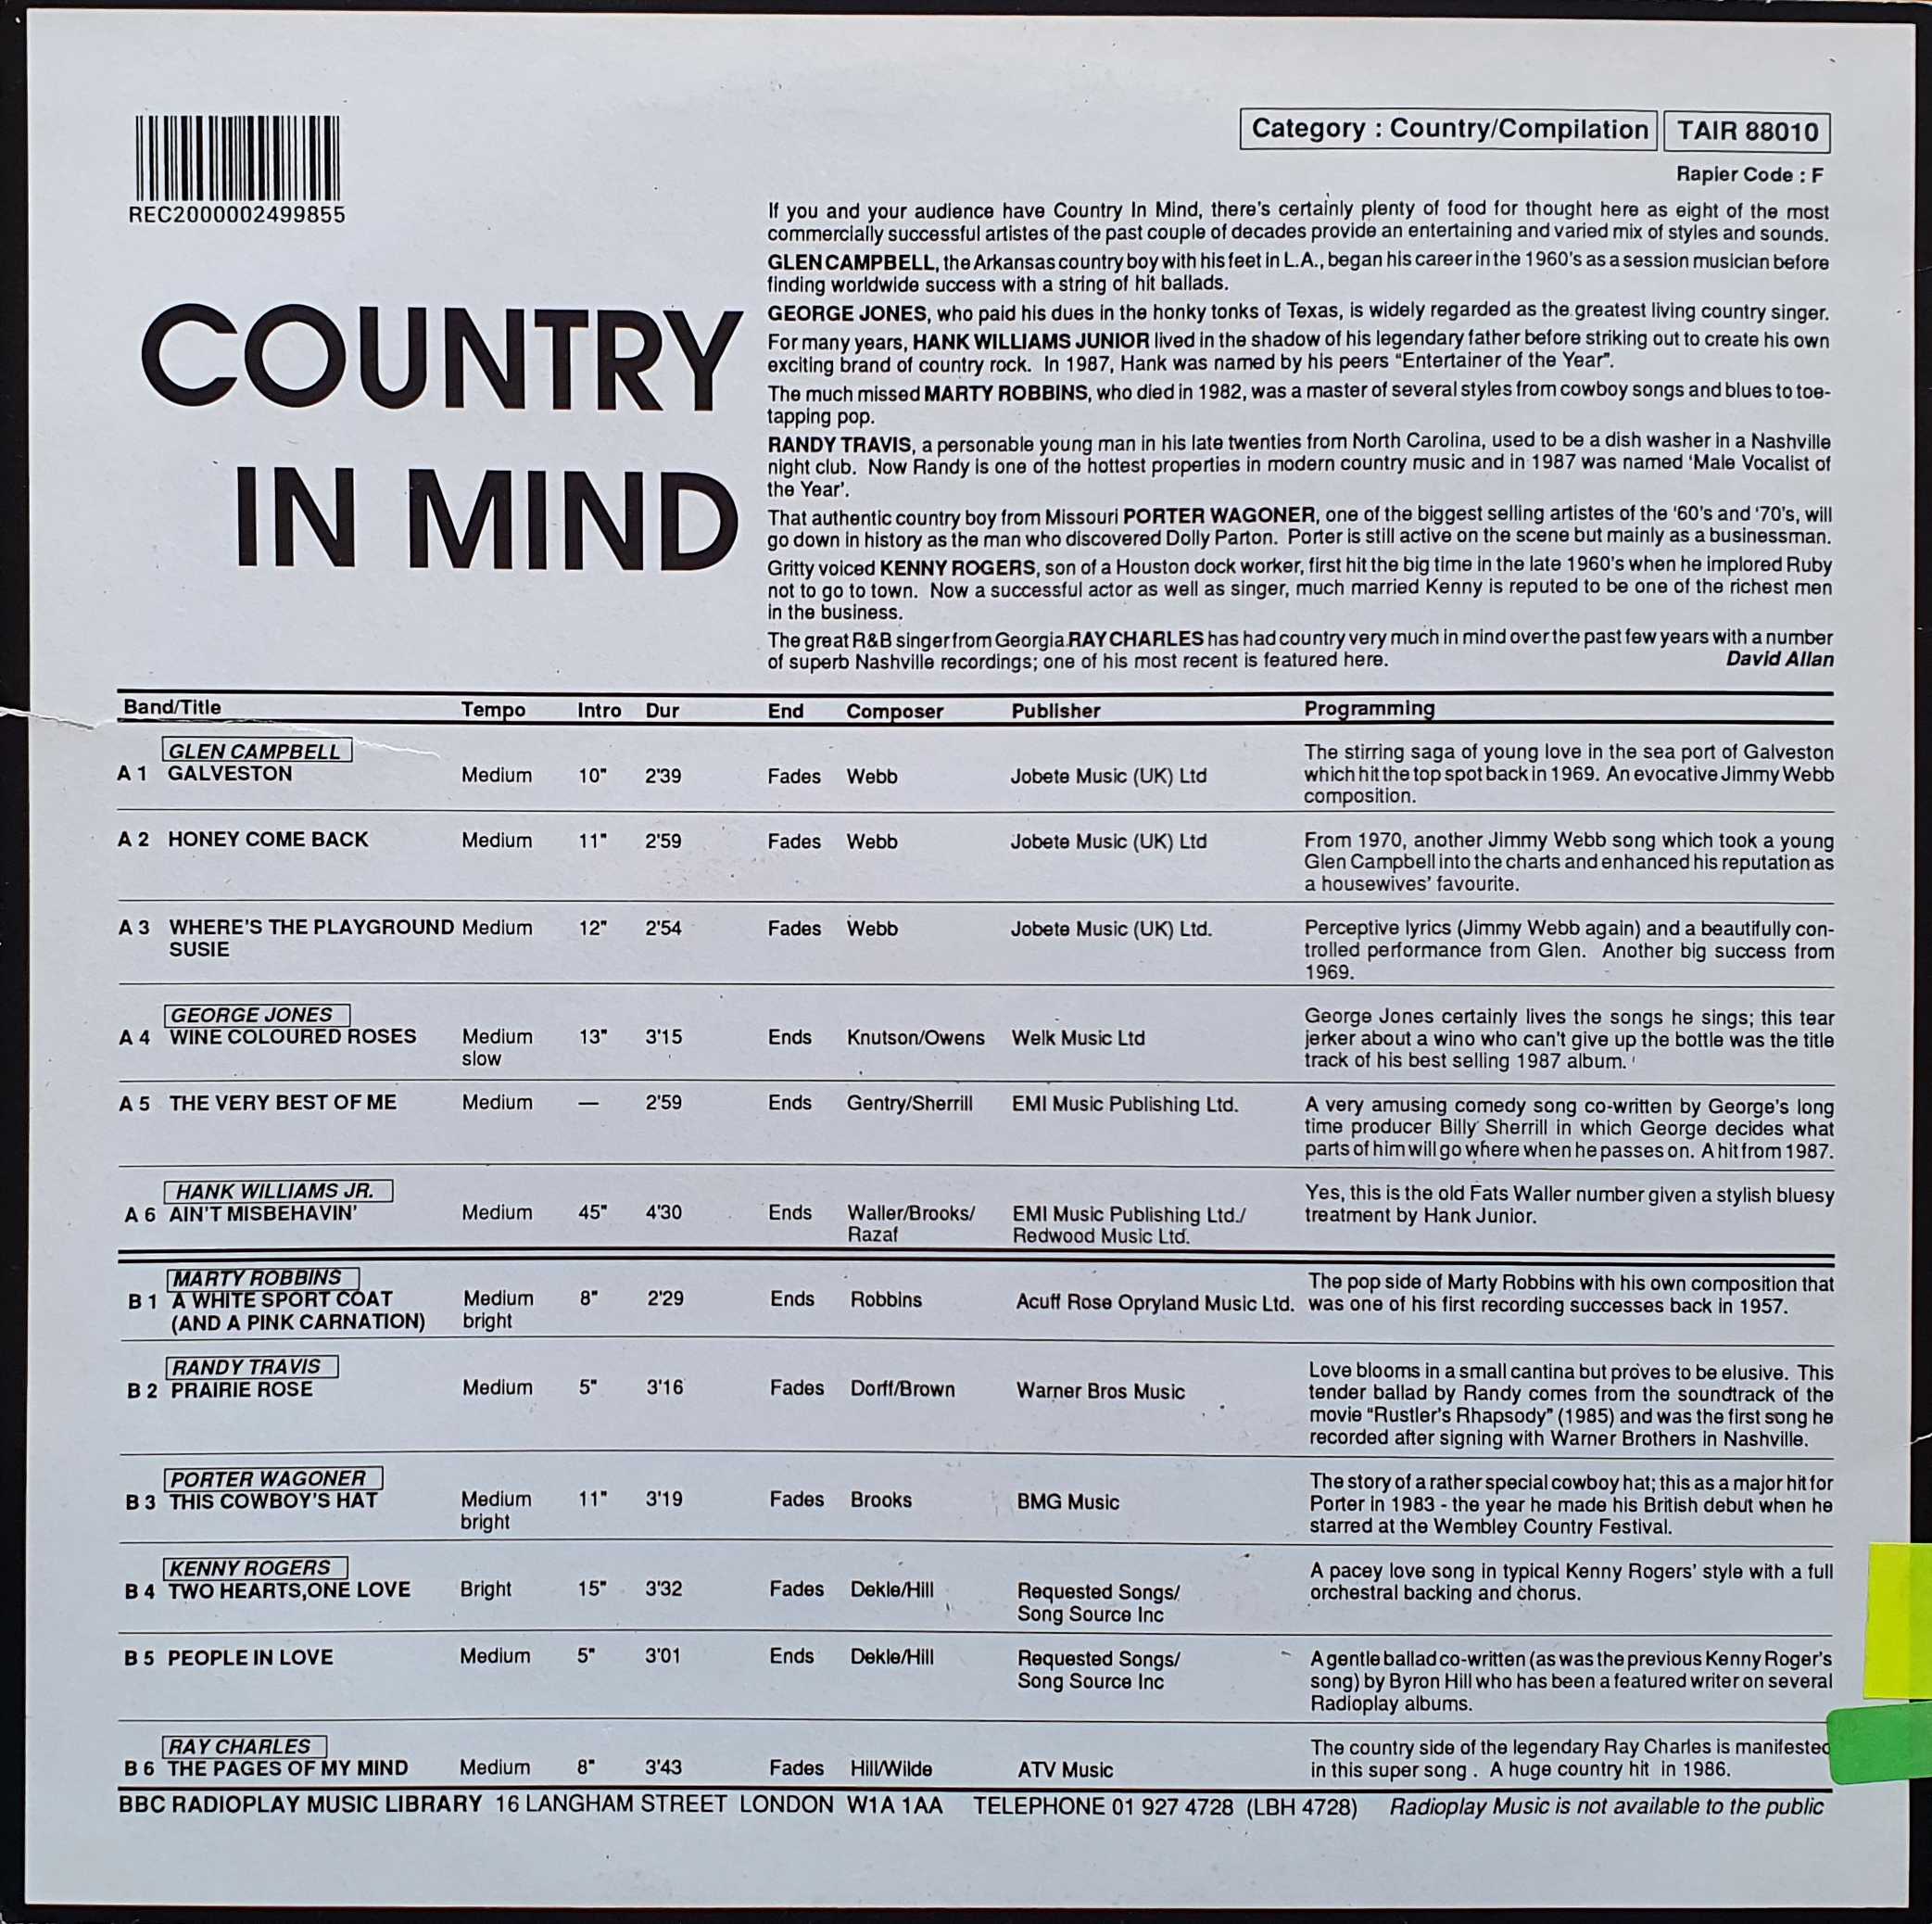 Picture of TAIR 88010 Country in mind by artist Various from the BBC records and Tapes library